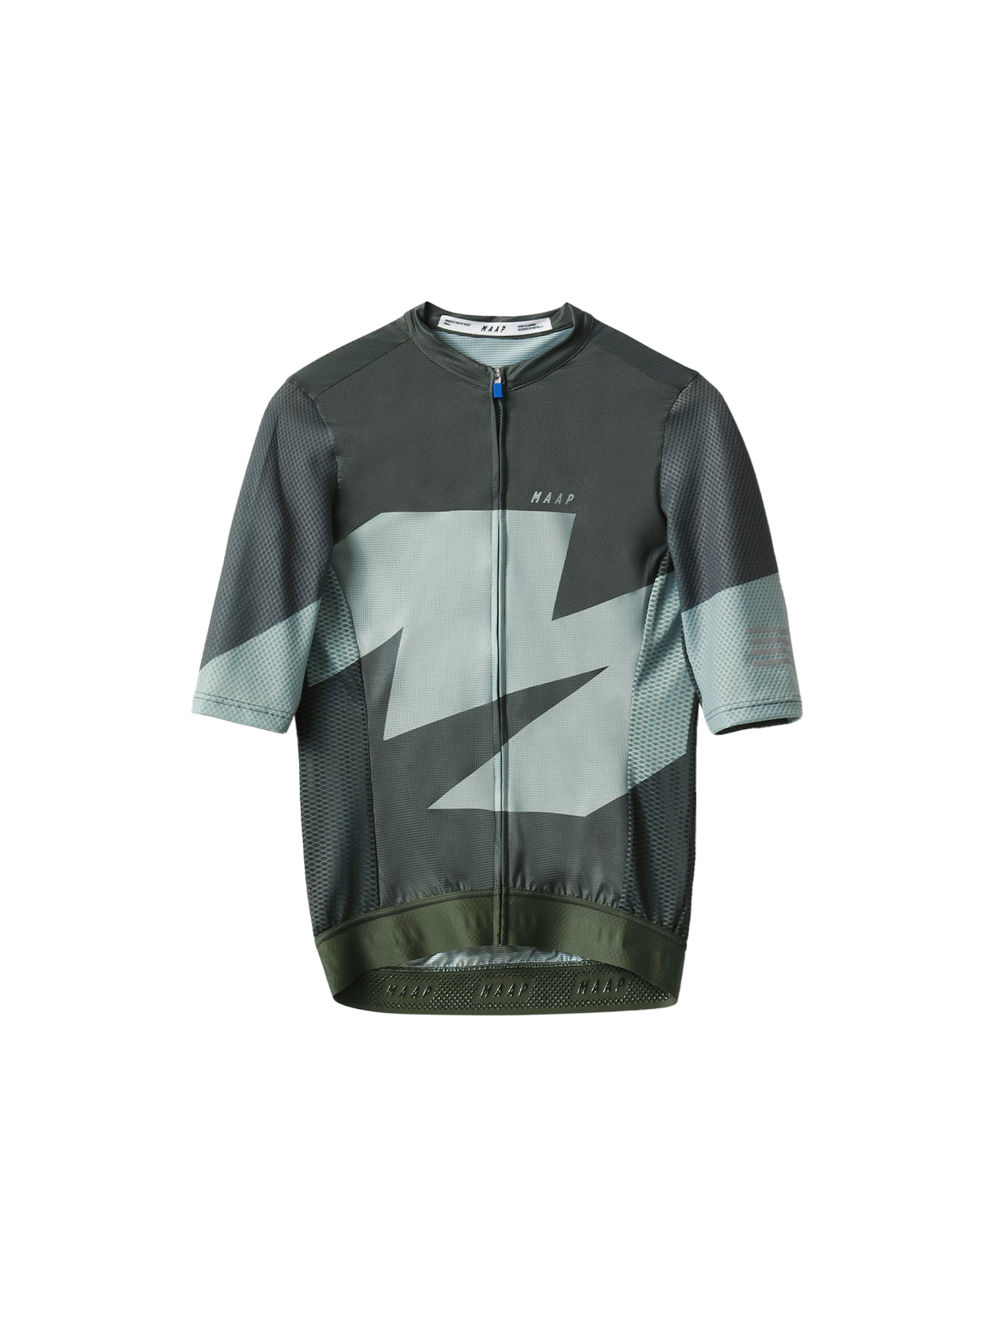 Product Image for Women's Evolve Pro Air Jersey